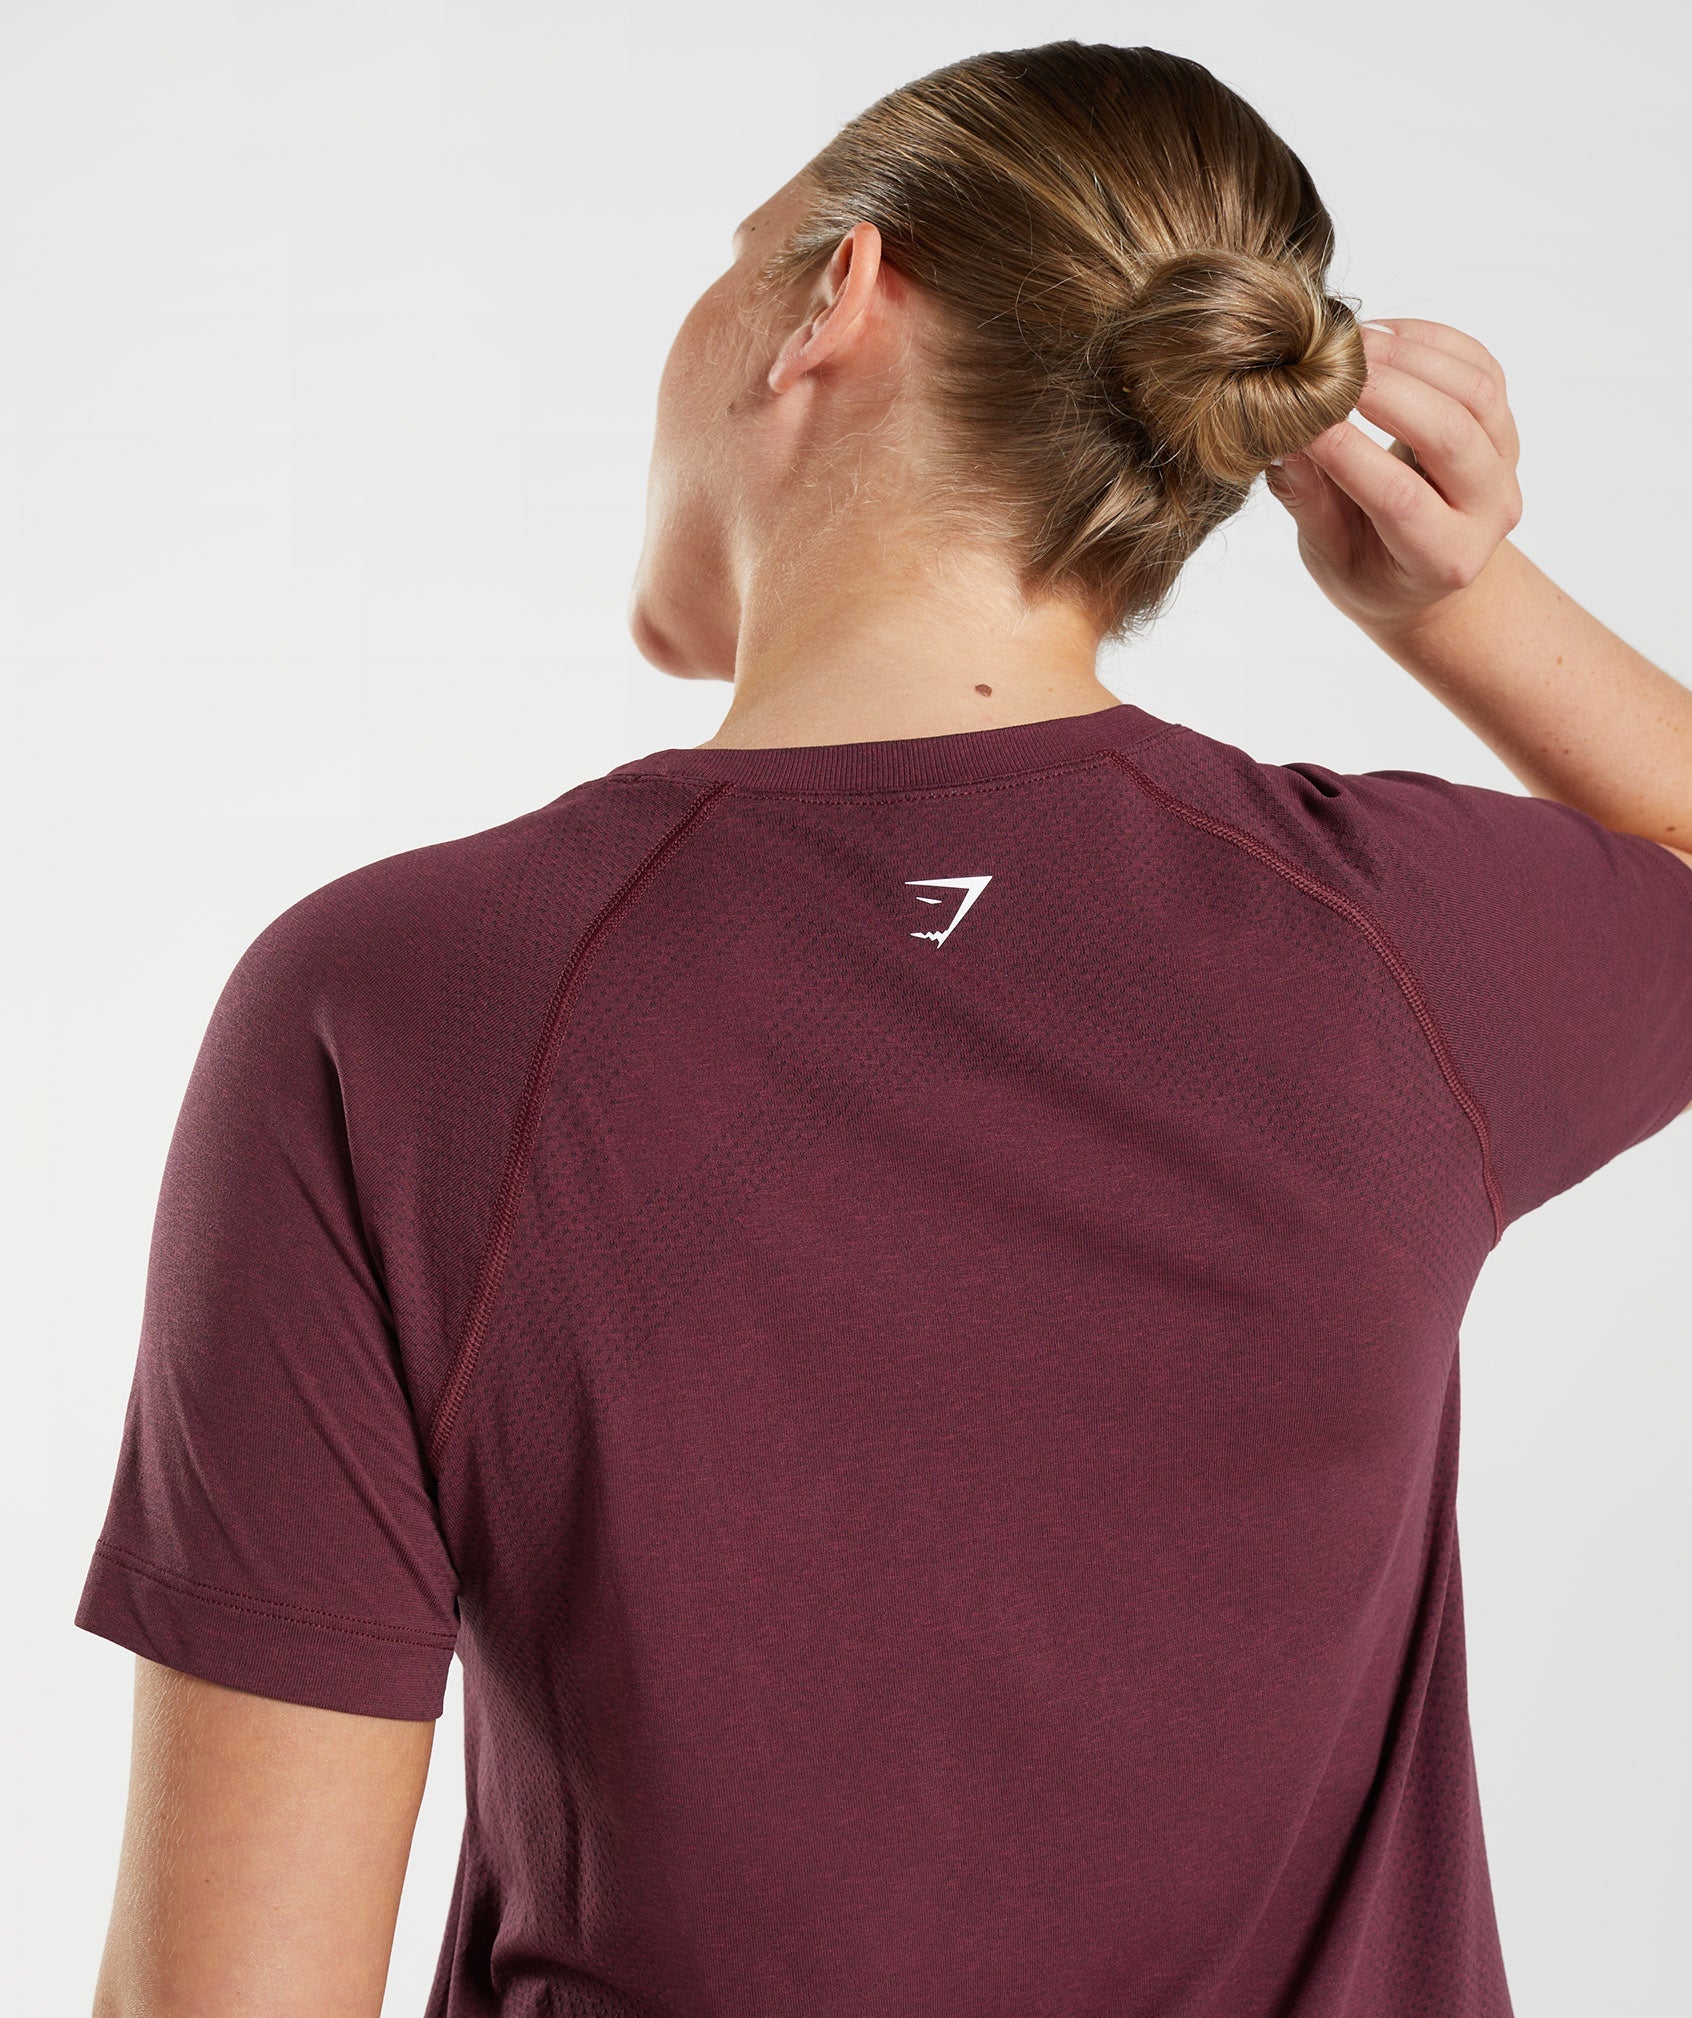 Vital Seamless 2.0 Light T-Shirt in Baked Maroon Marl - view 3